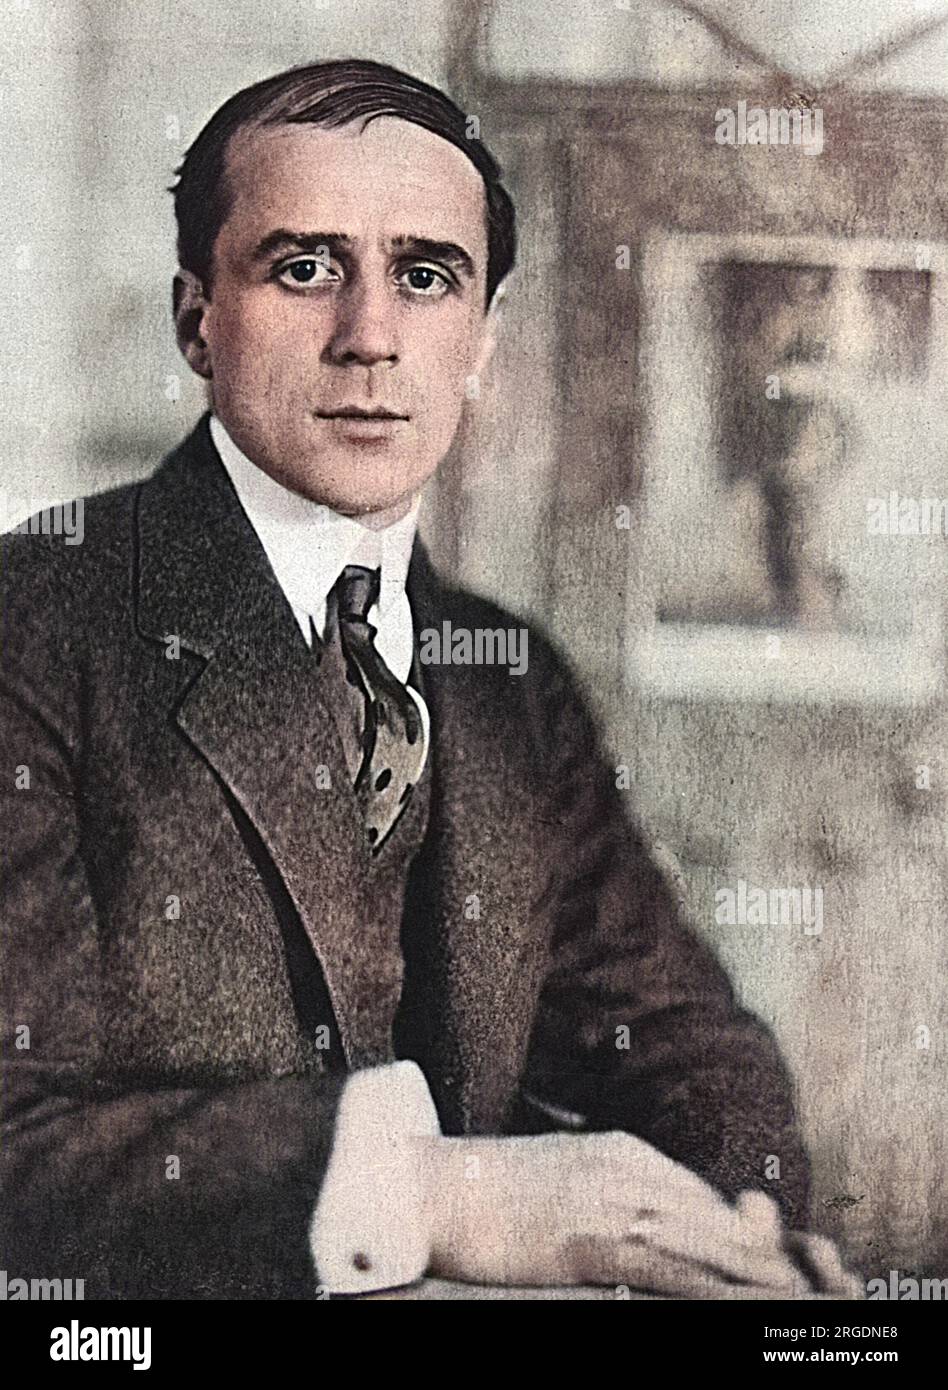 Michel Fokine (Mikhail), (1880 - 1942), Russian choreographer and ballet dancer. He staged more than 70 ballets in Europe and the USA, most famously with the Ballets Russes. Stock Photo